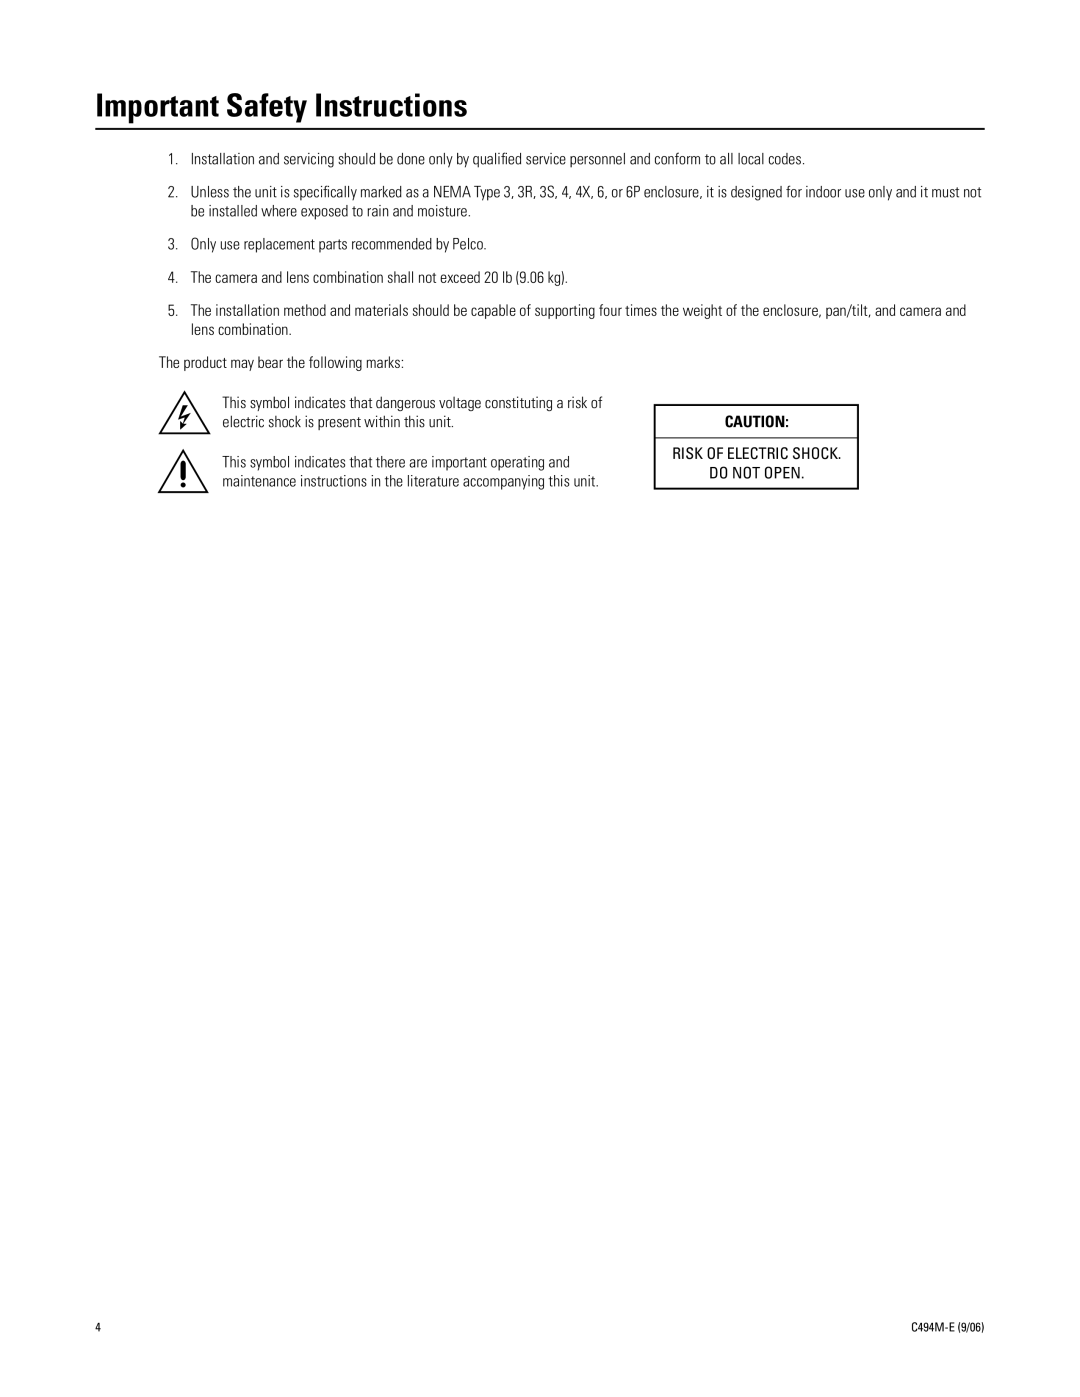 Pelco C494M-E manual Important Safety Instructions 